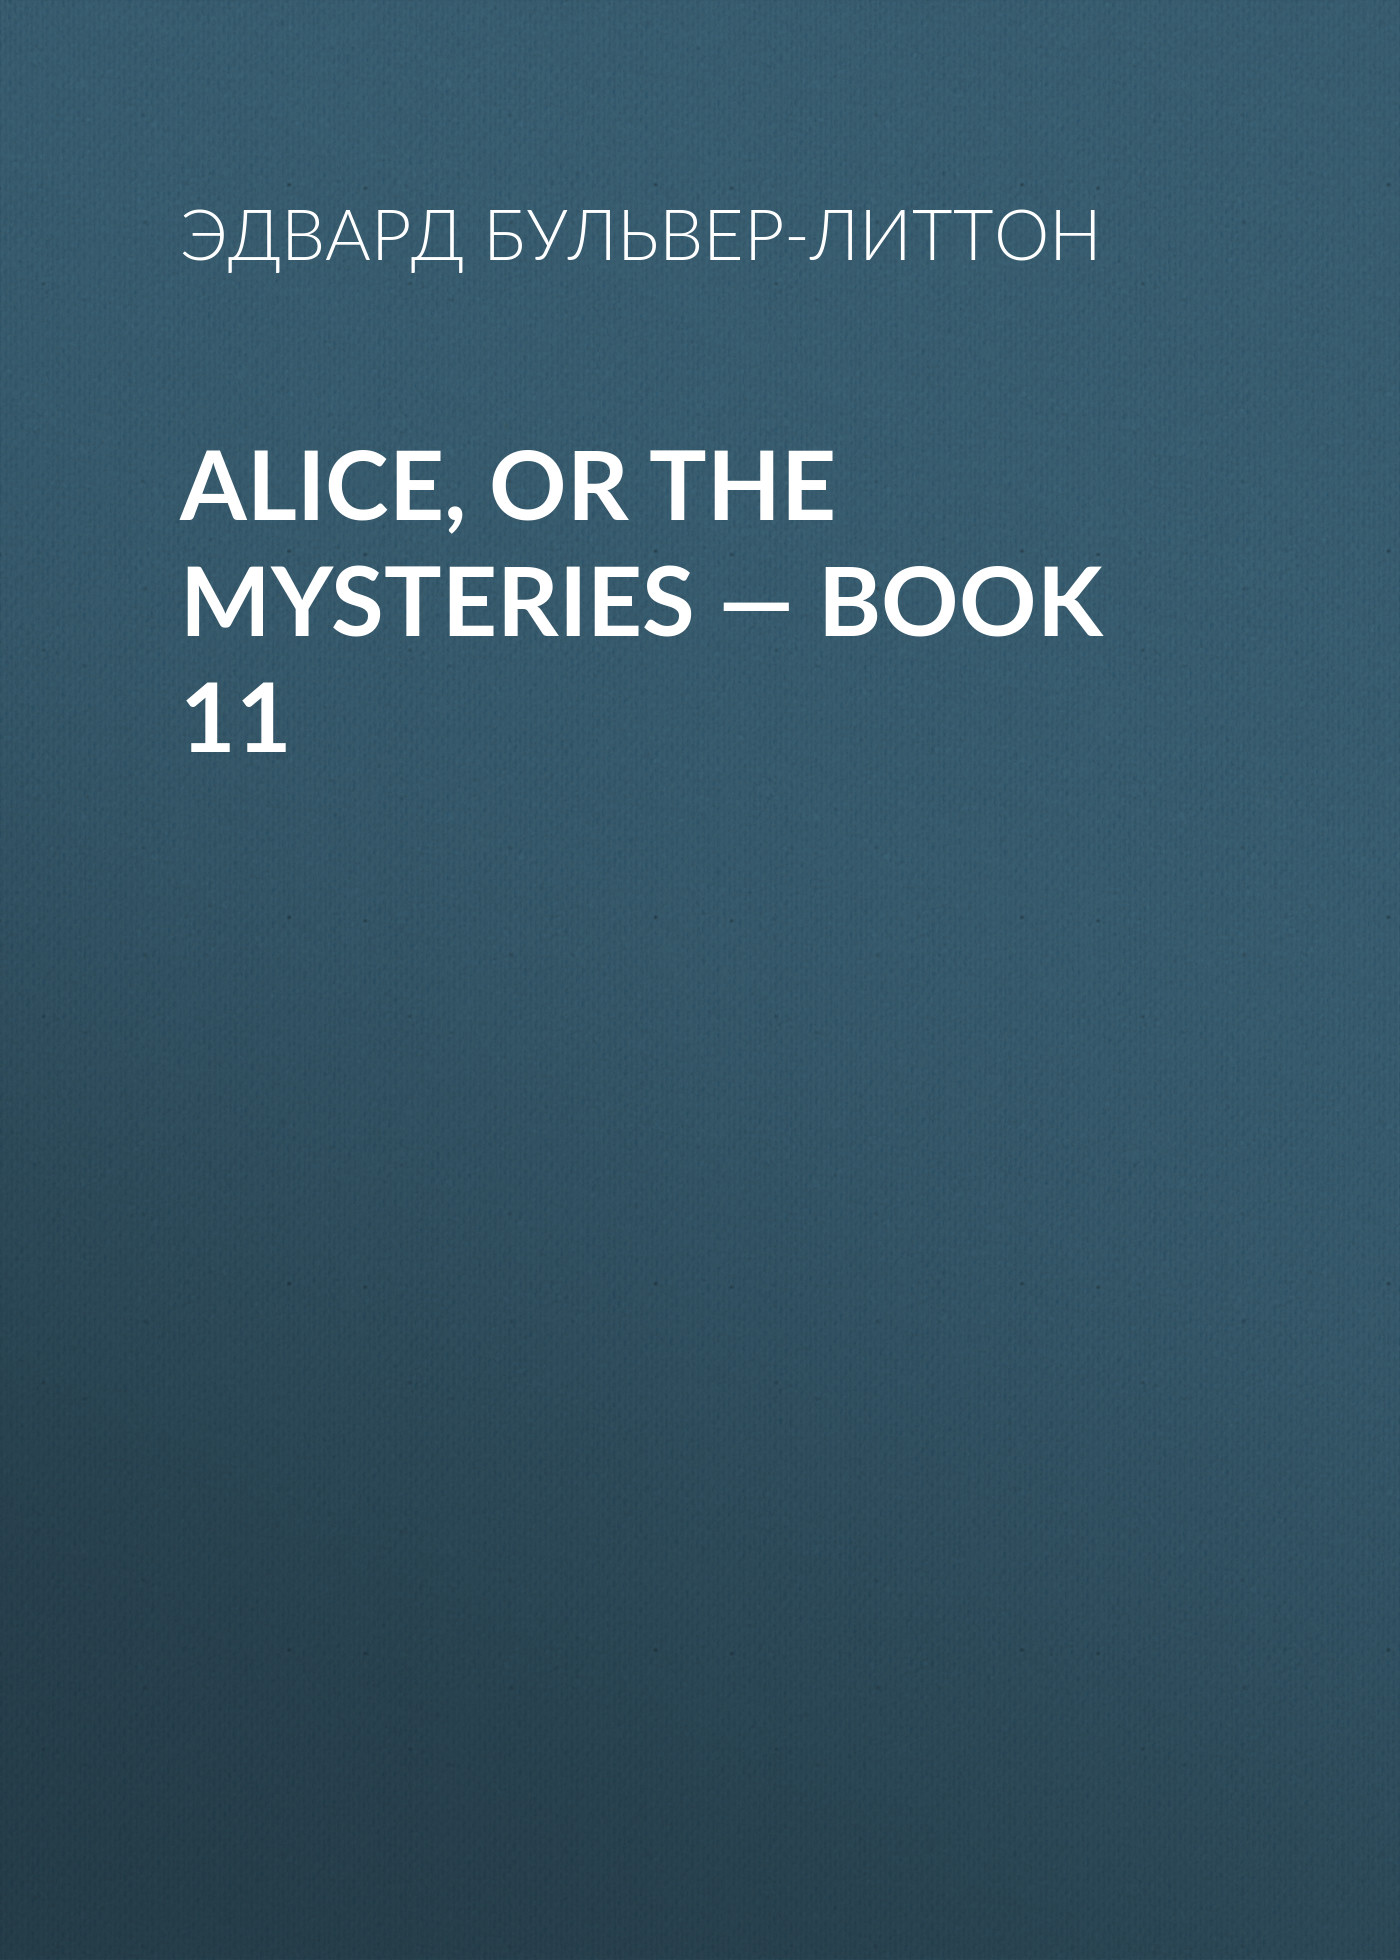 Alice, or the Mysteries— Book 11